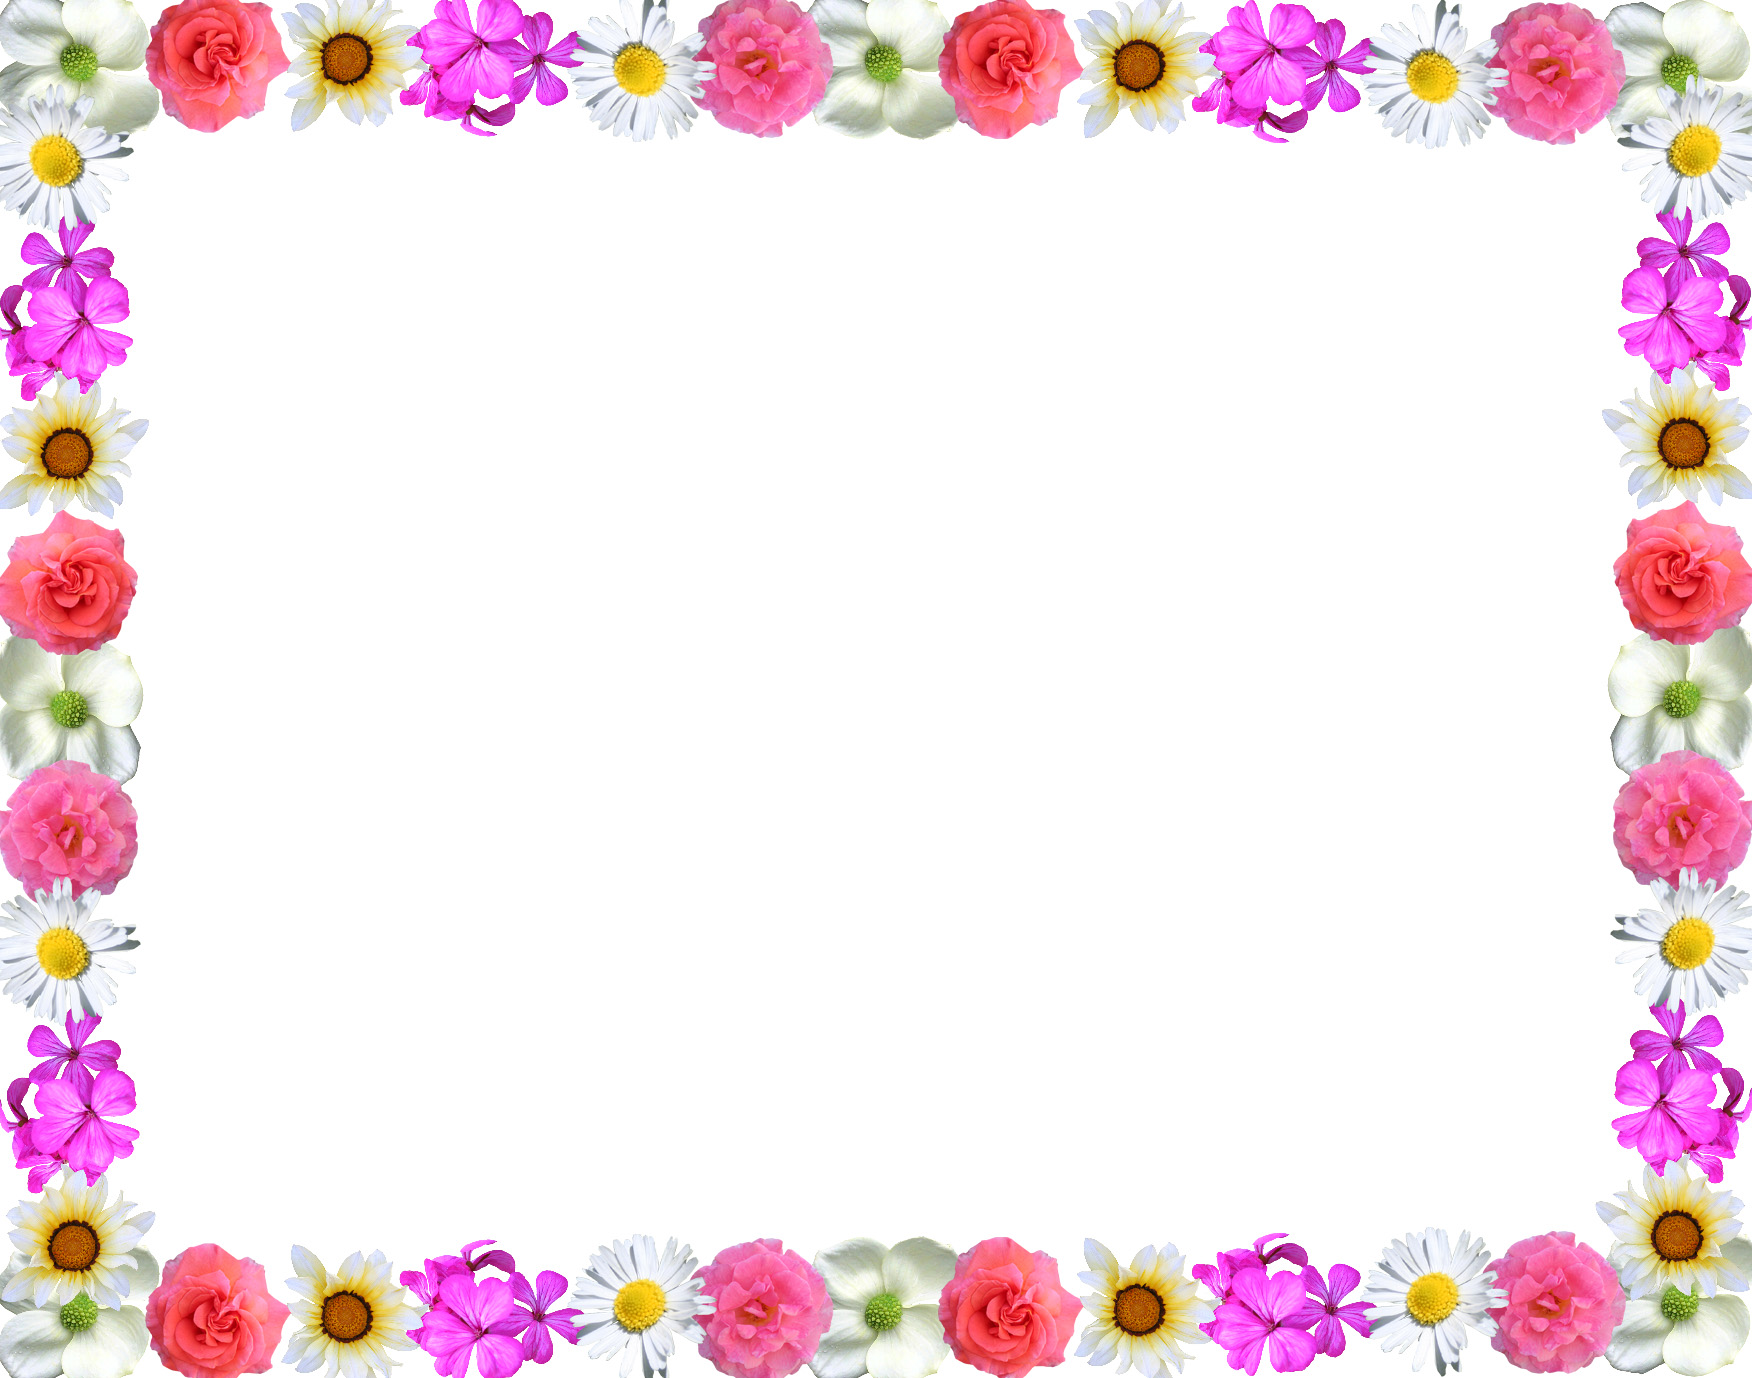 Page Borders With Flowers